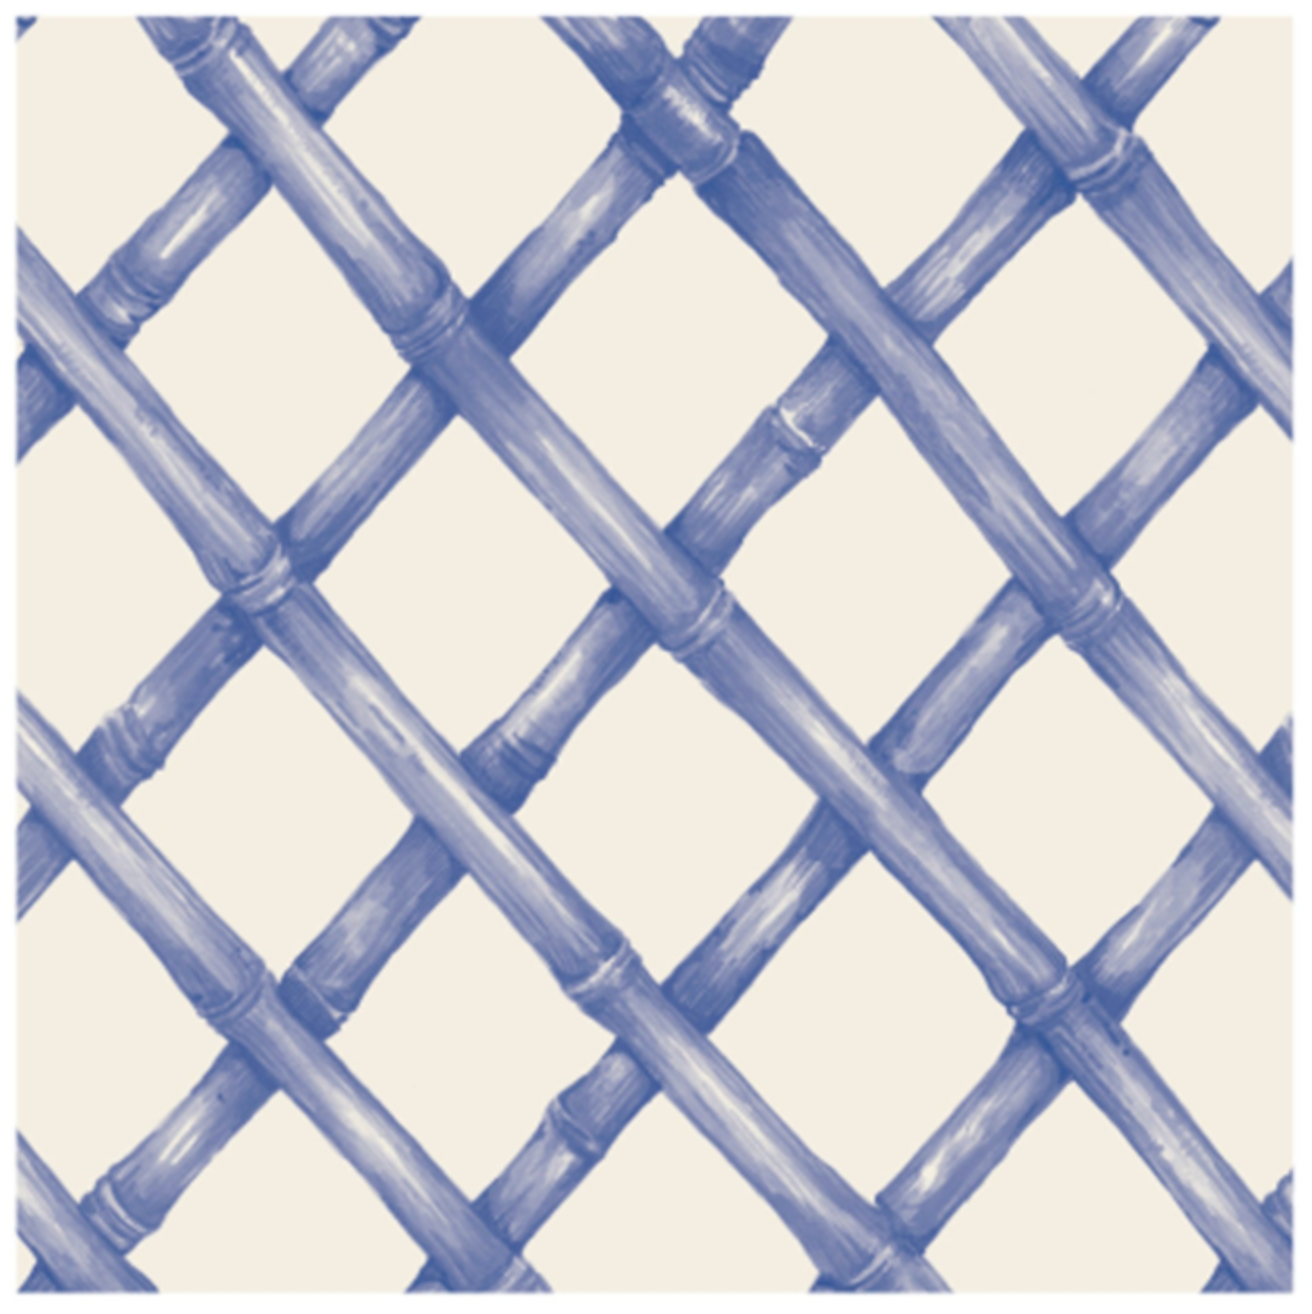 A Hester &amp; Cook Blue Lattice Napkin pattern adorns this blue and white bamboo netting wallpaper.